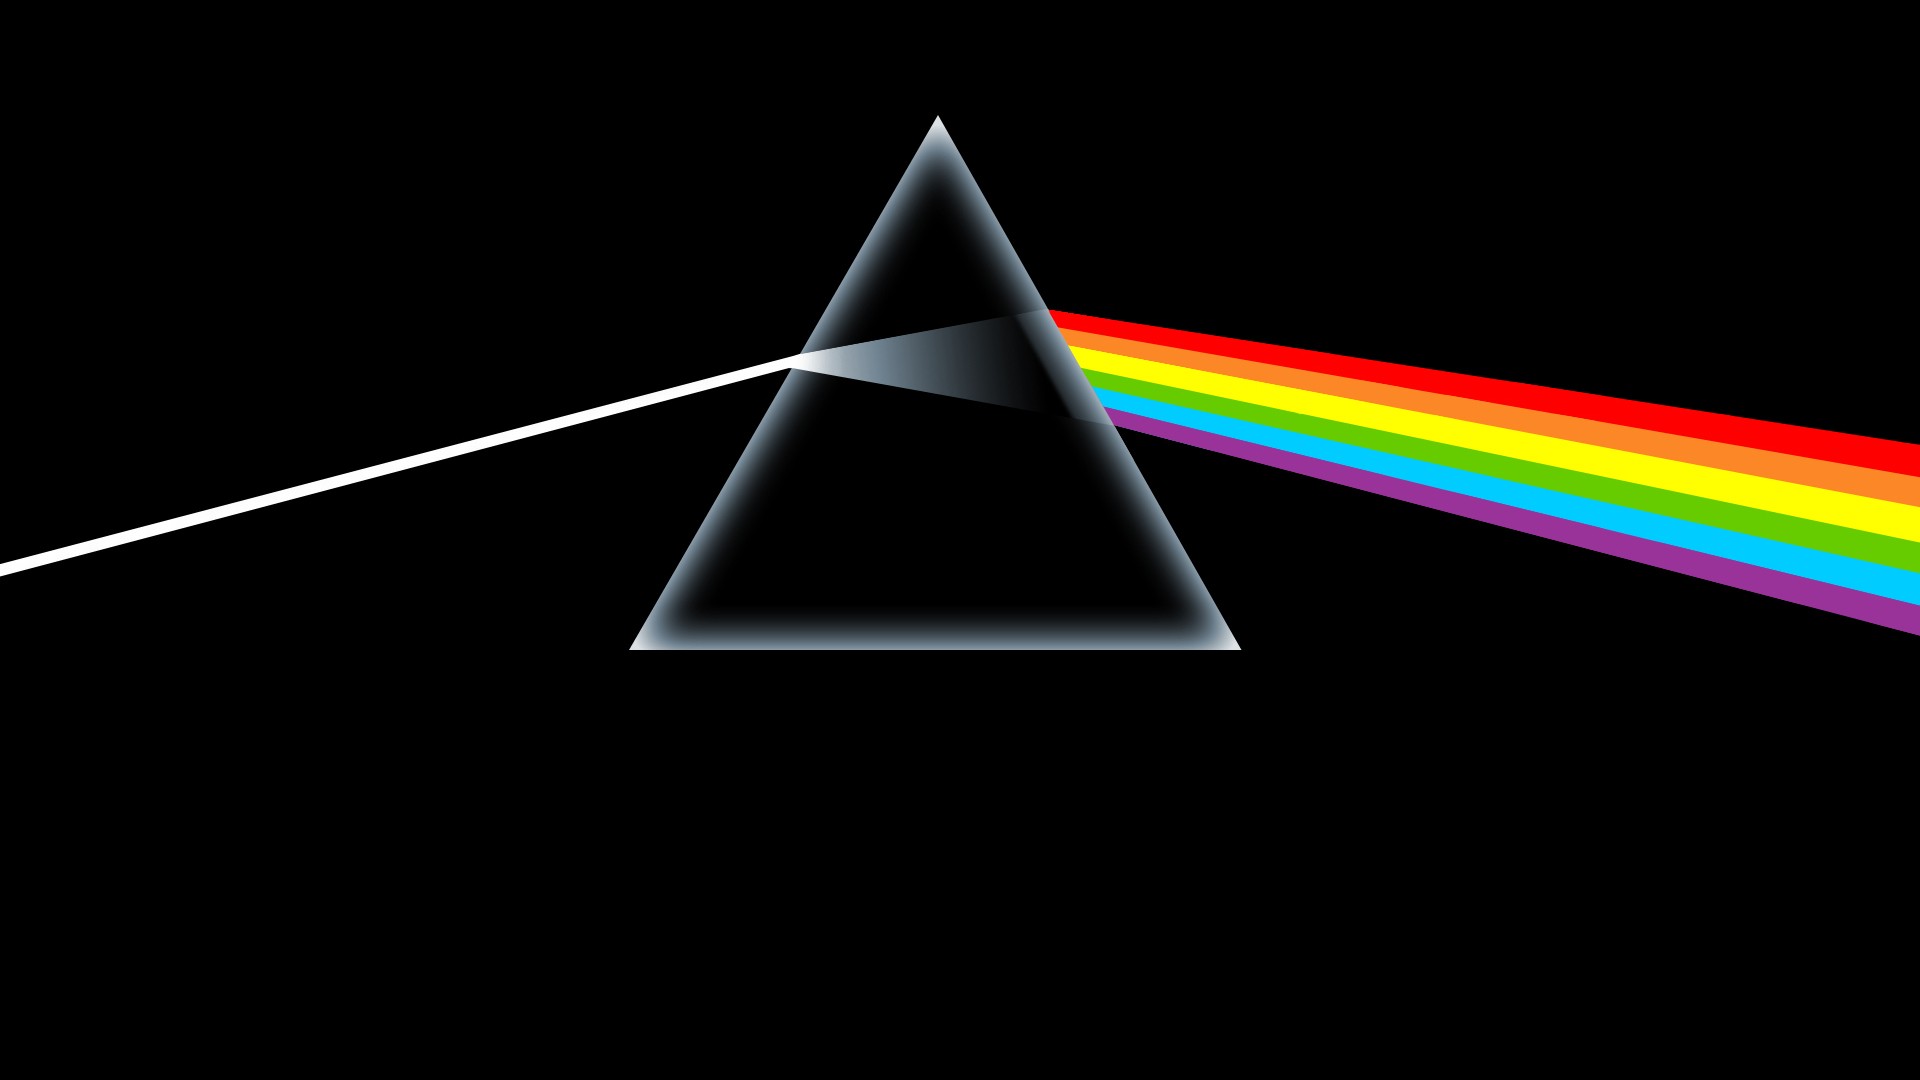 Pink Floyd Prism Album Covers Cover Art 1920x1080